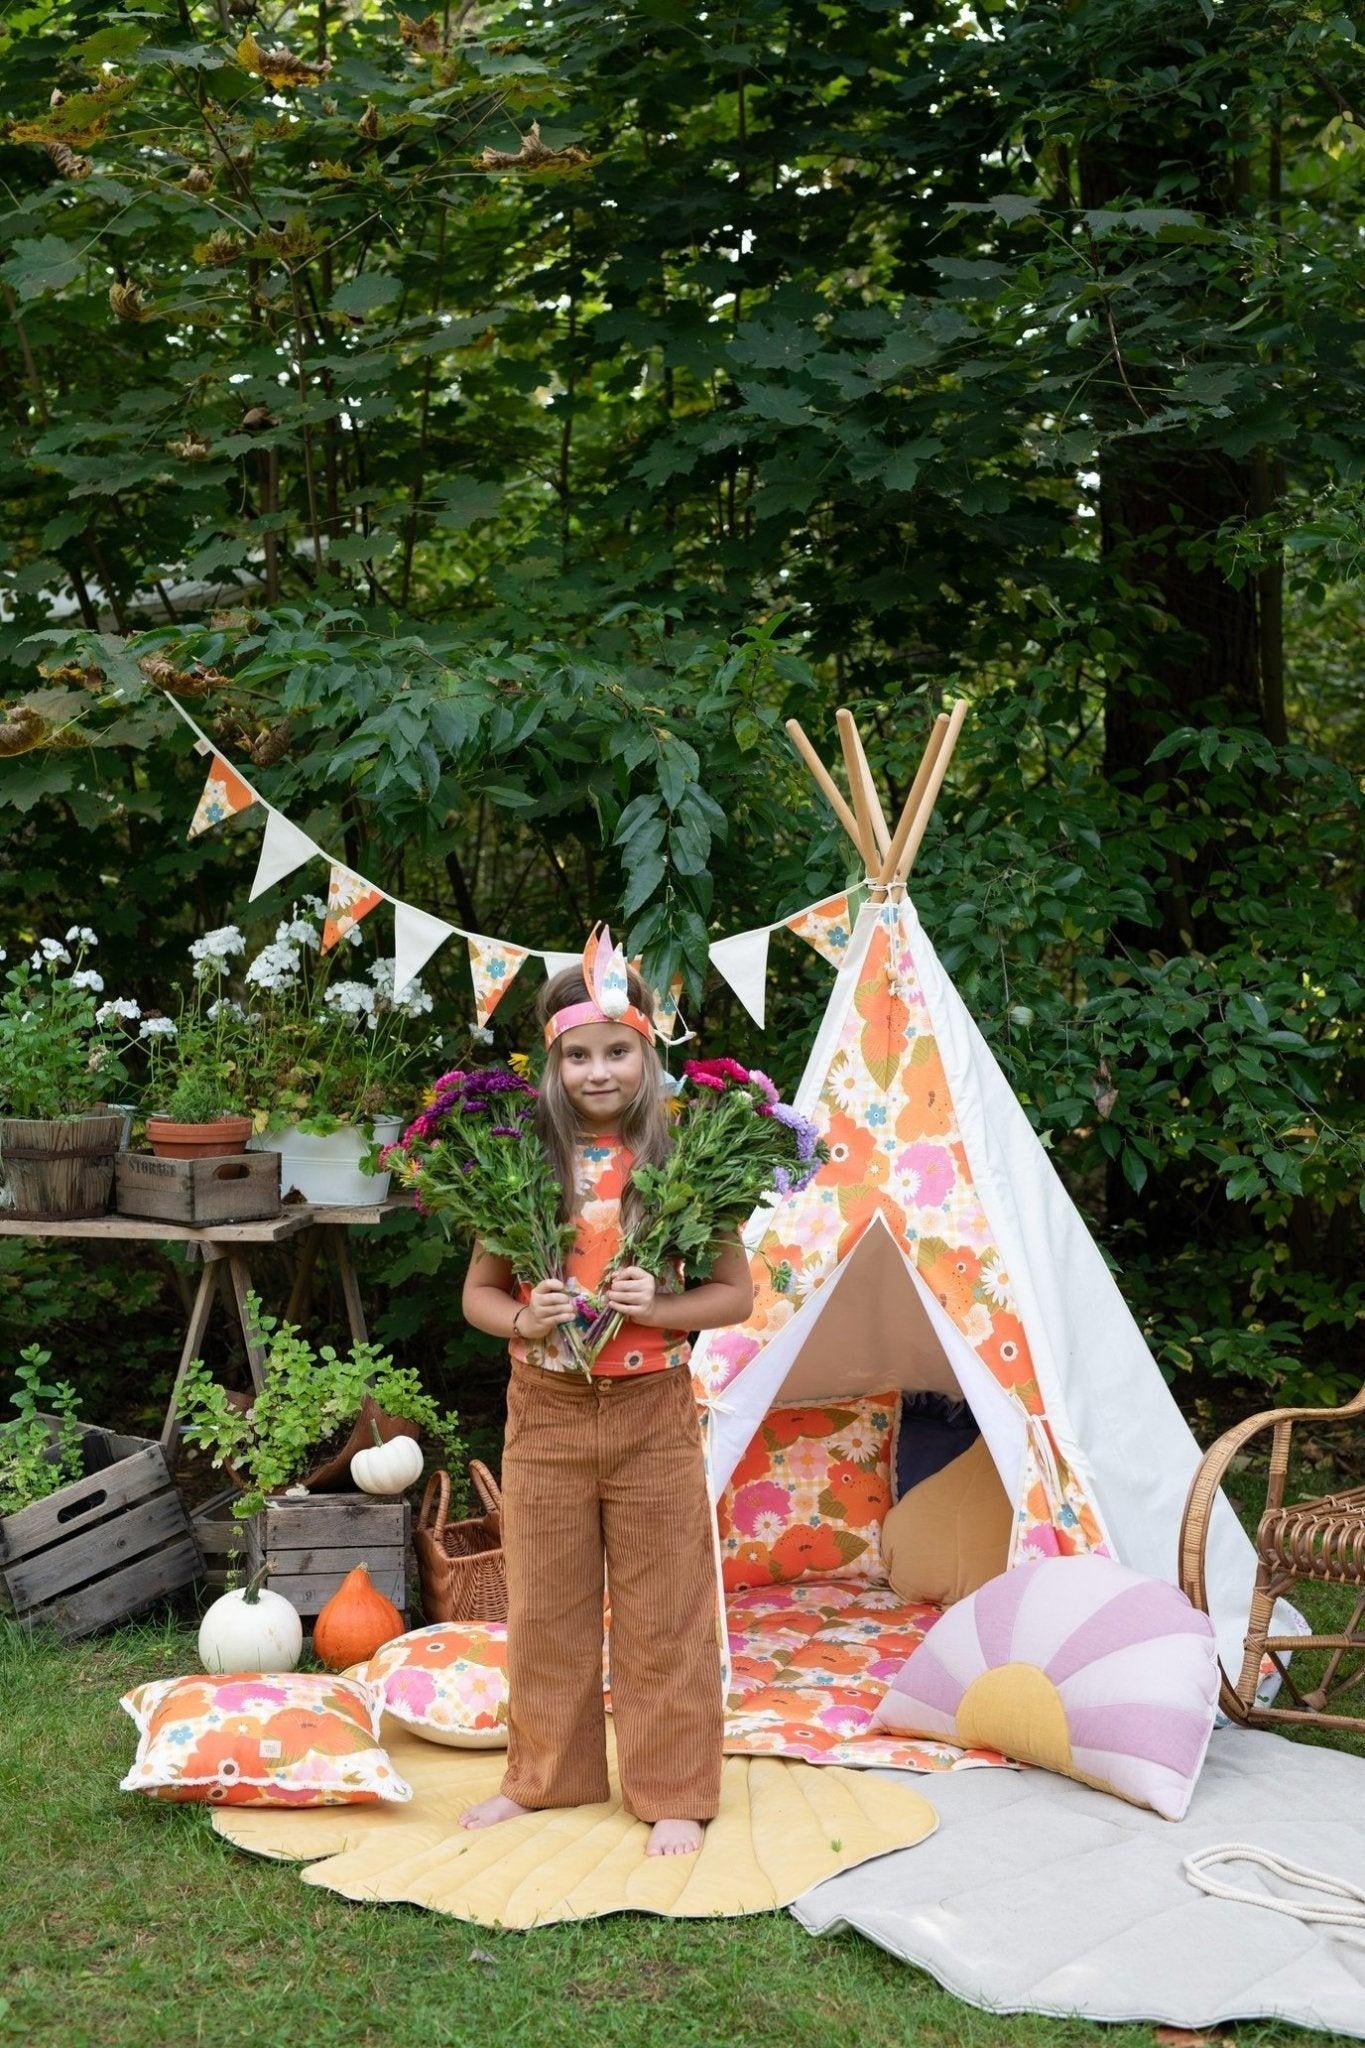 “Picnic with the flowers” Teepee Tent - Moi Mili